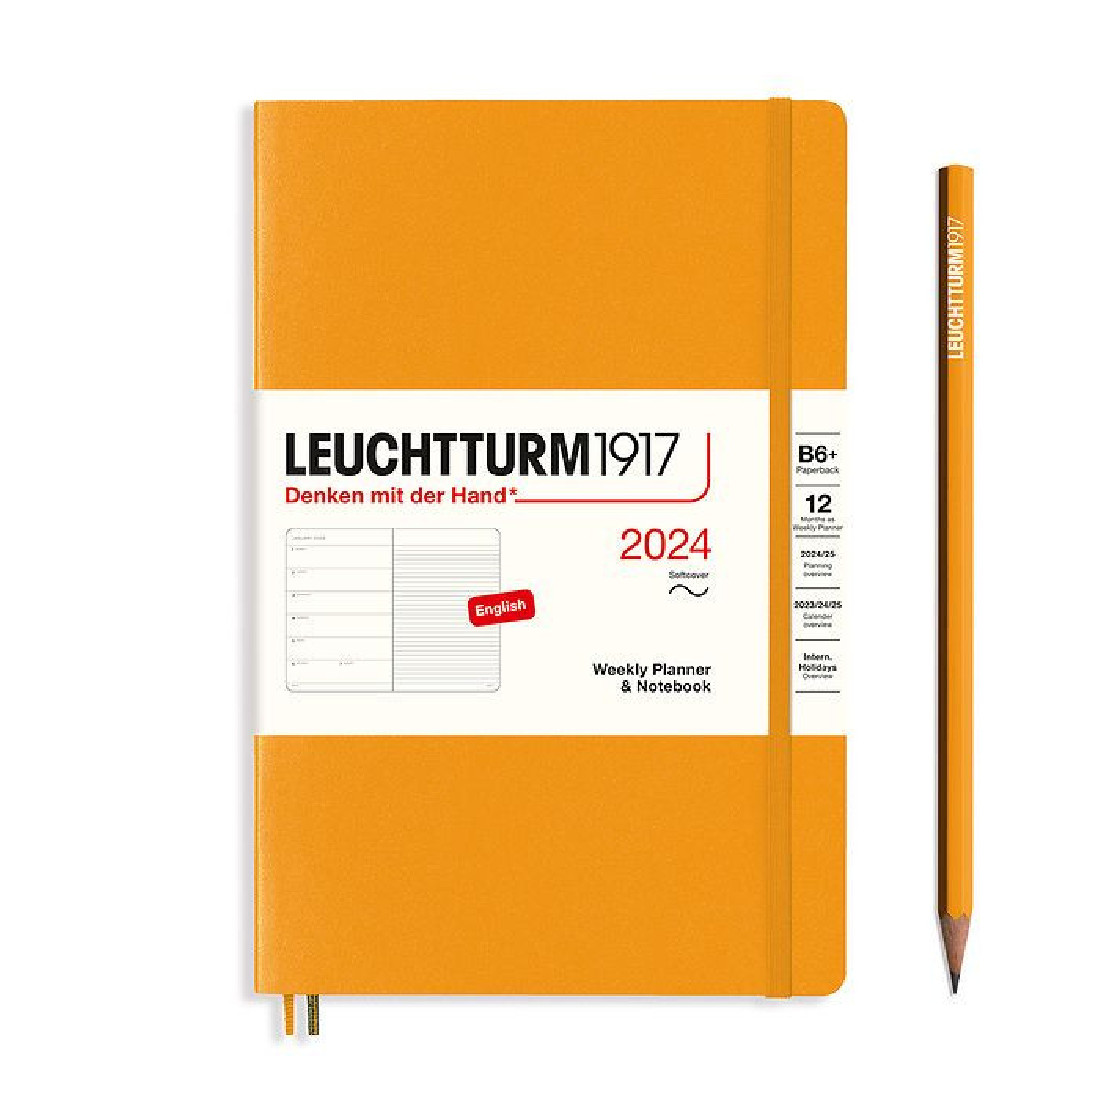 Leuchtturm 1917 Weekly Planner and Notebook 2024 Rising Sun Paperback B6 Plus Soft Cover